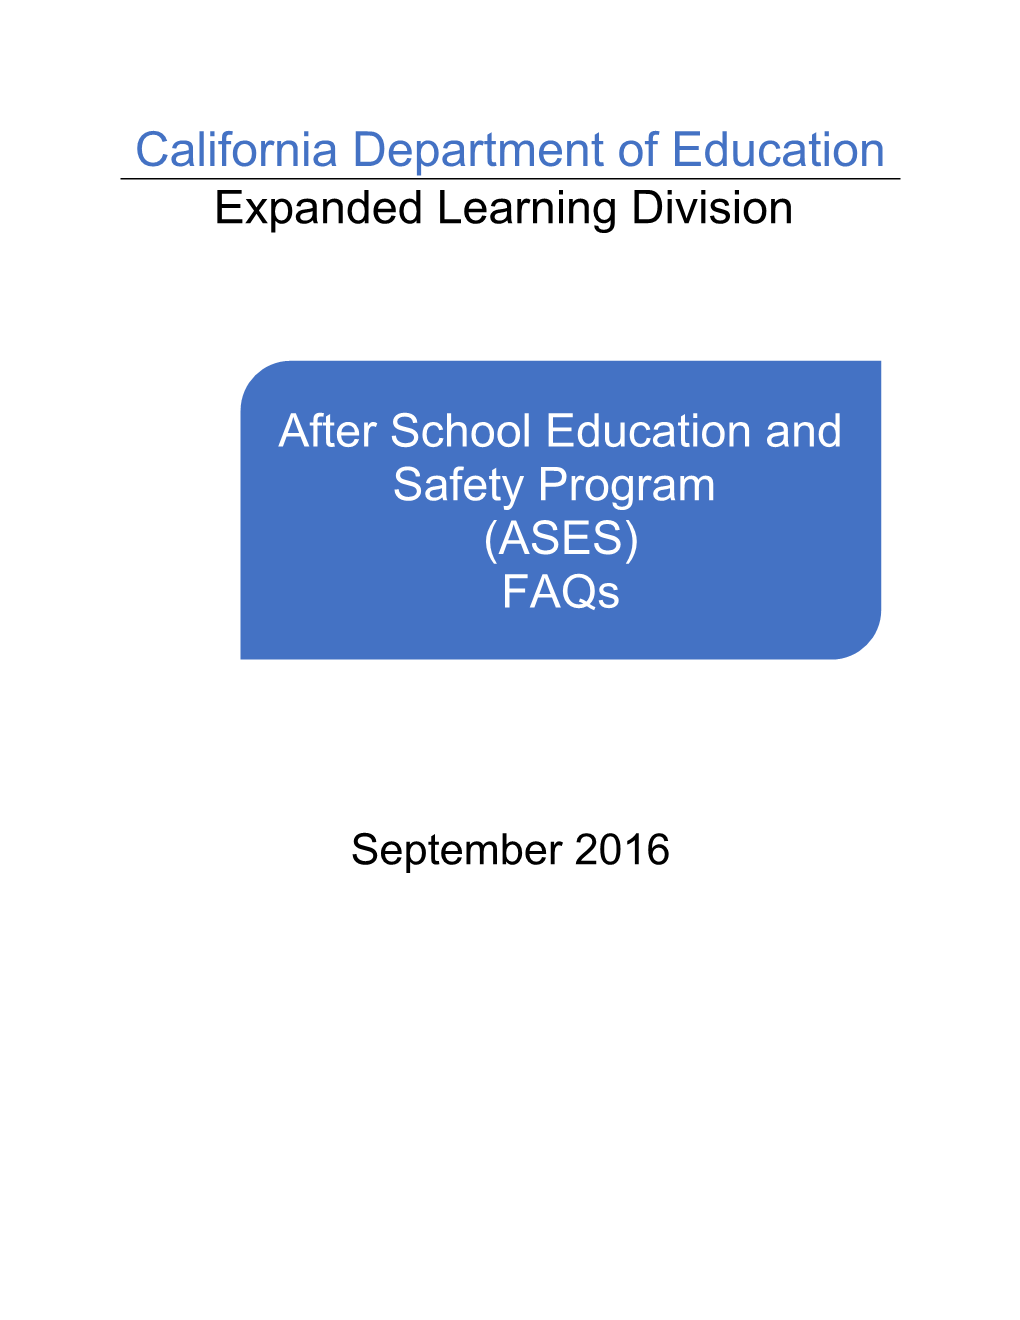 ASES - Frequently Asked Questions (CA Dept of Education)